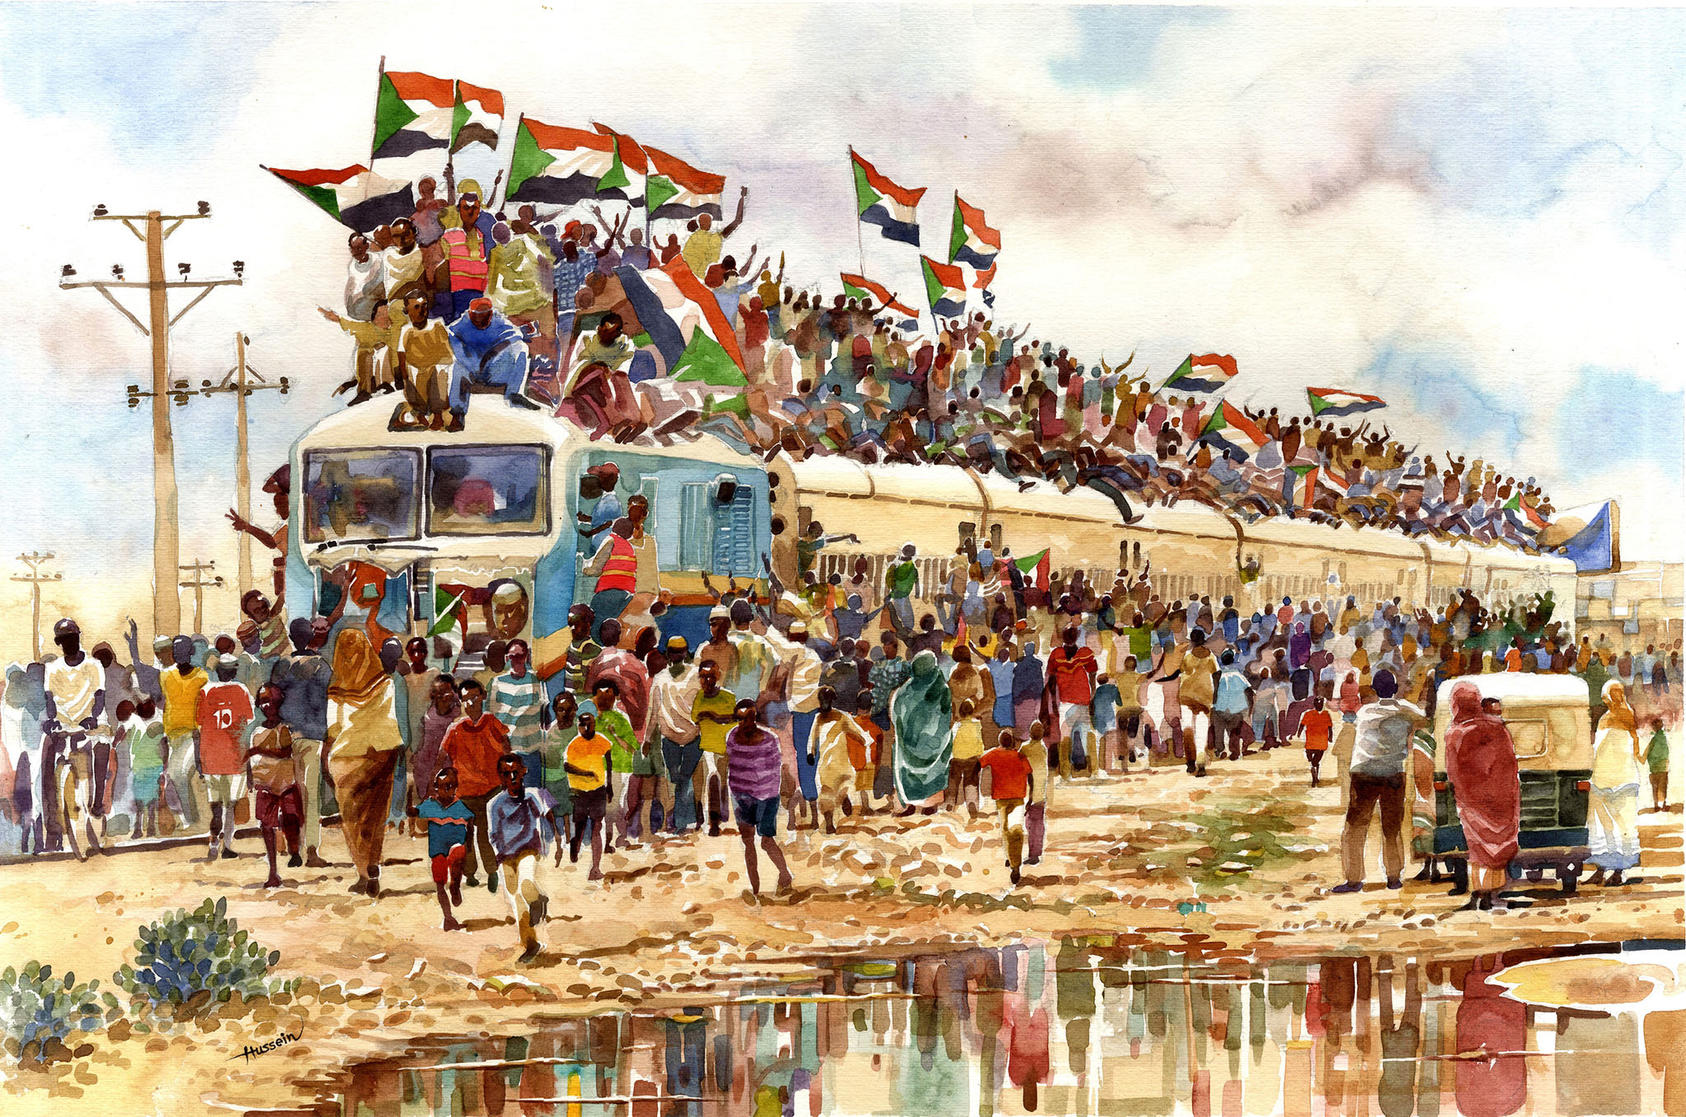 &lsquo;Freedom Train&rsquo;. Credit: Hussein Merghani. Source: https://www.usip.org/blog/2020/11/how-art-helped-propel-sudans-revolution